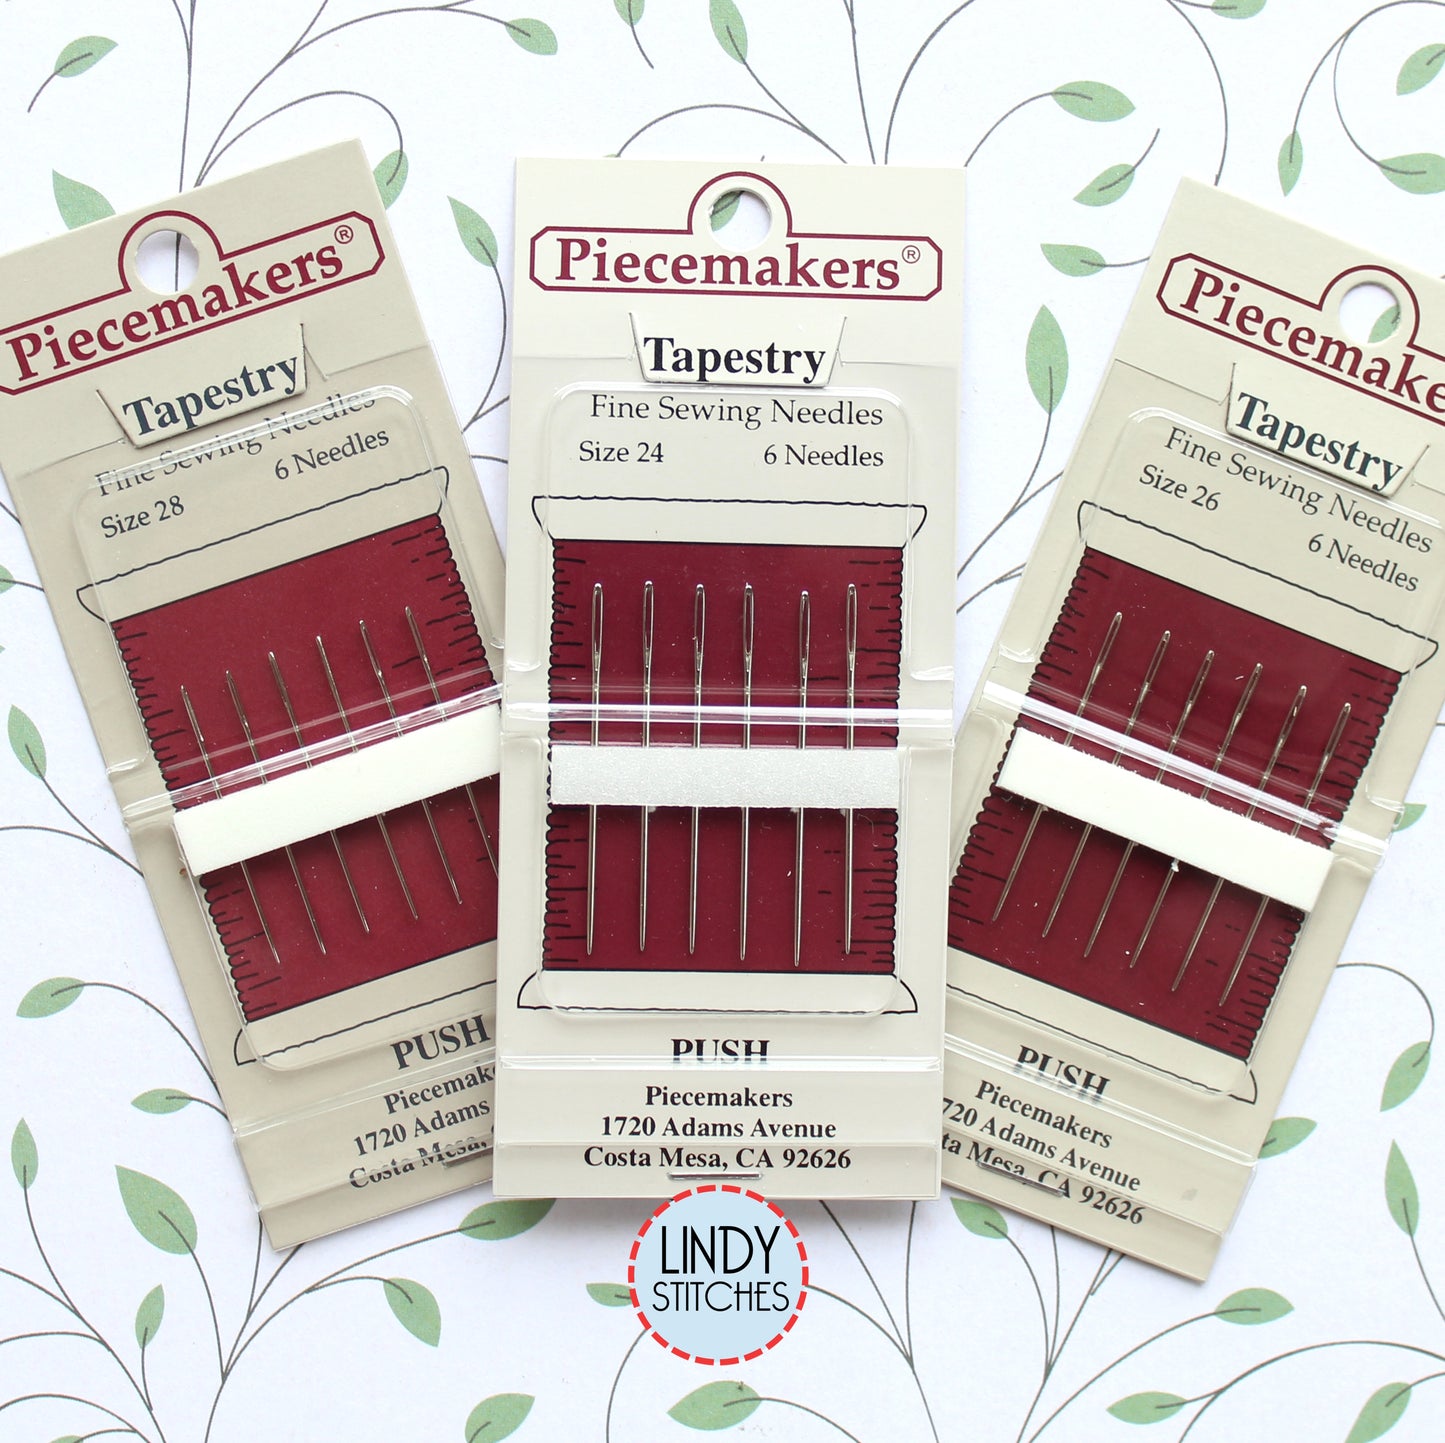 Piecemakers Tapestry Needles Size 24 26 28 for Cross Stitch